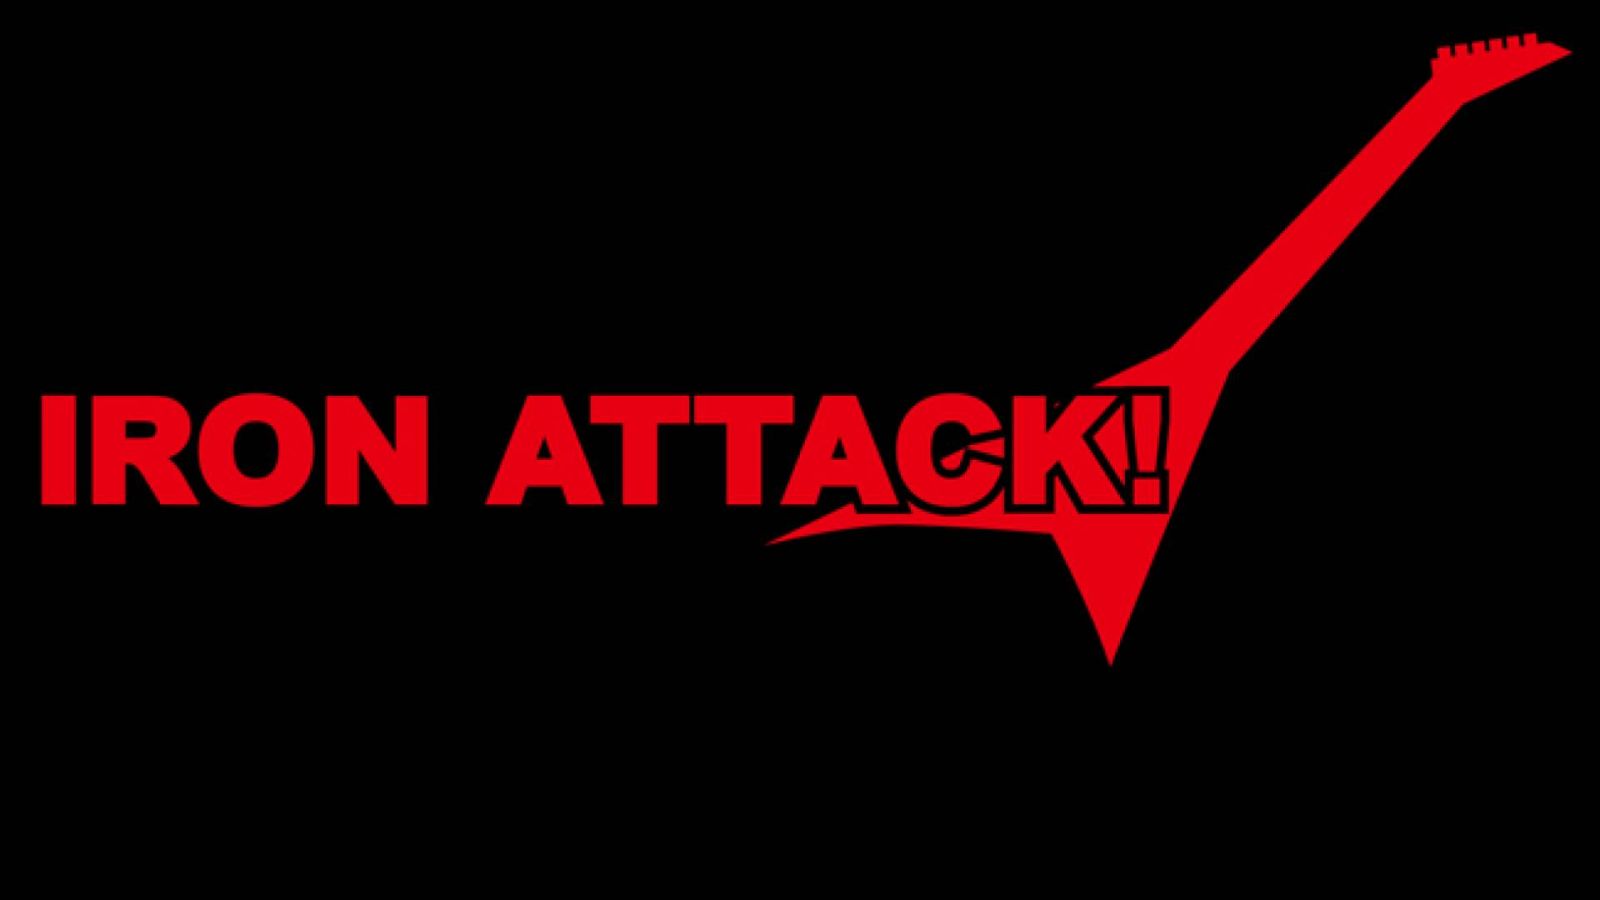 Nowe wydawnictwa IRON ATTACK! © 2015 IRON ATTACK! All rights reserved.